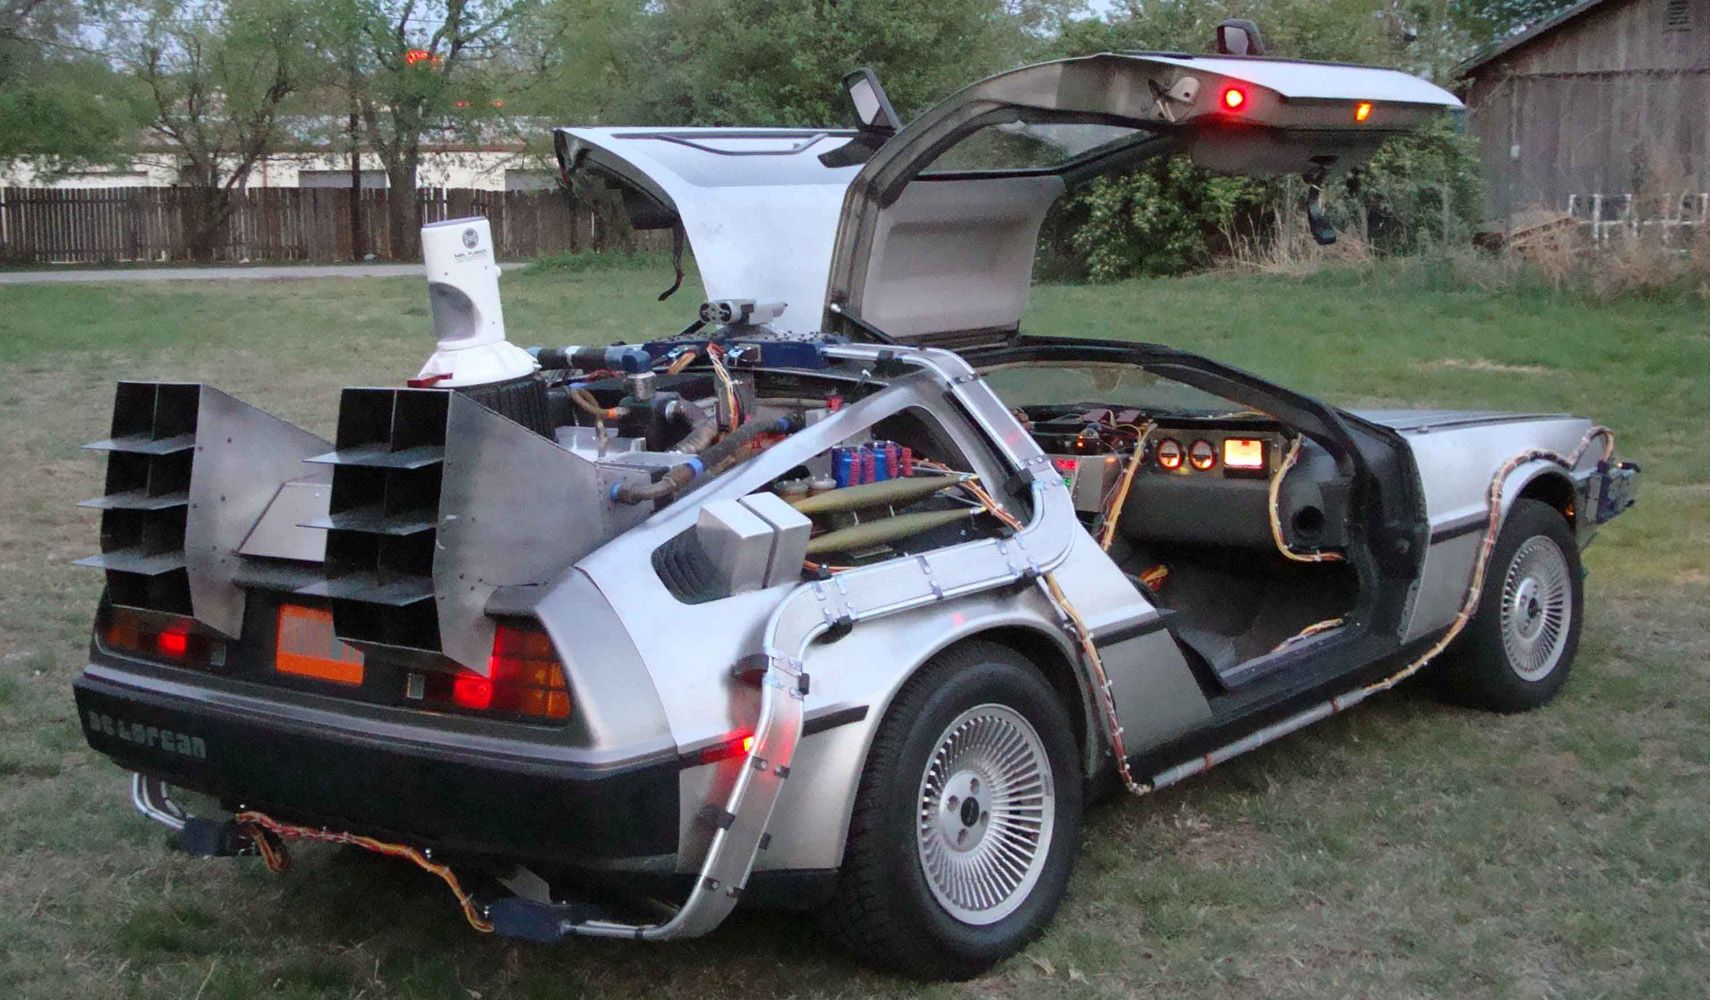 Today A Back To The Future Classic DMC Can Set You Back By More Than A $100,000